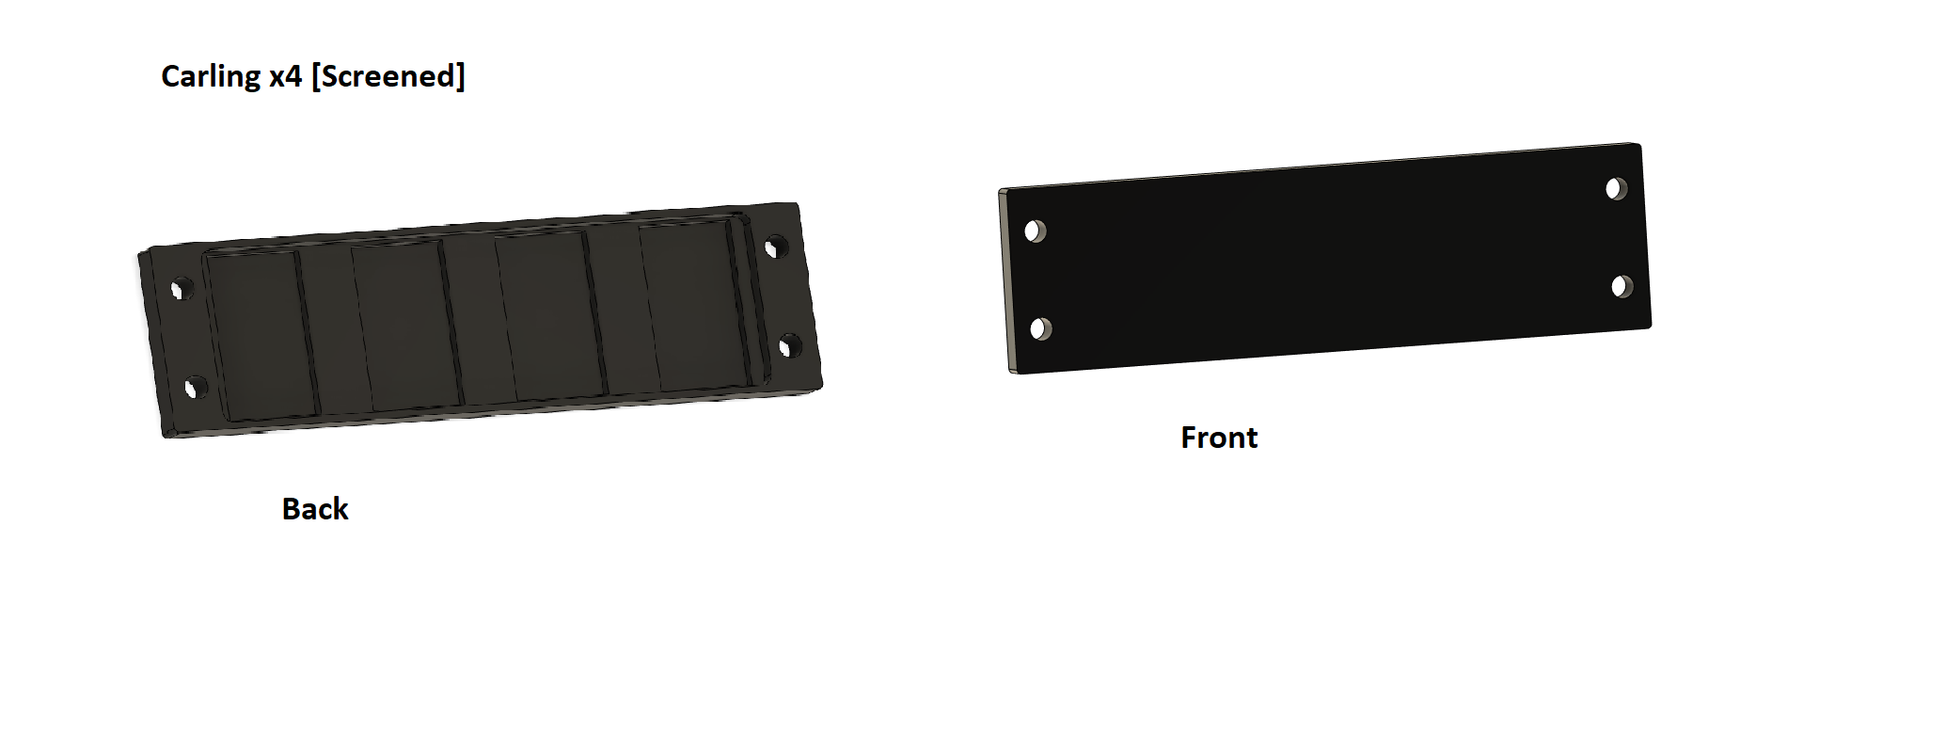 Front and back images of a Carling Cover panel for the fj60 bezel